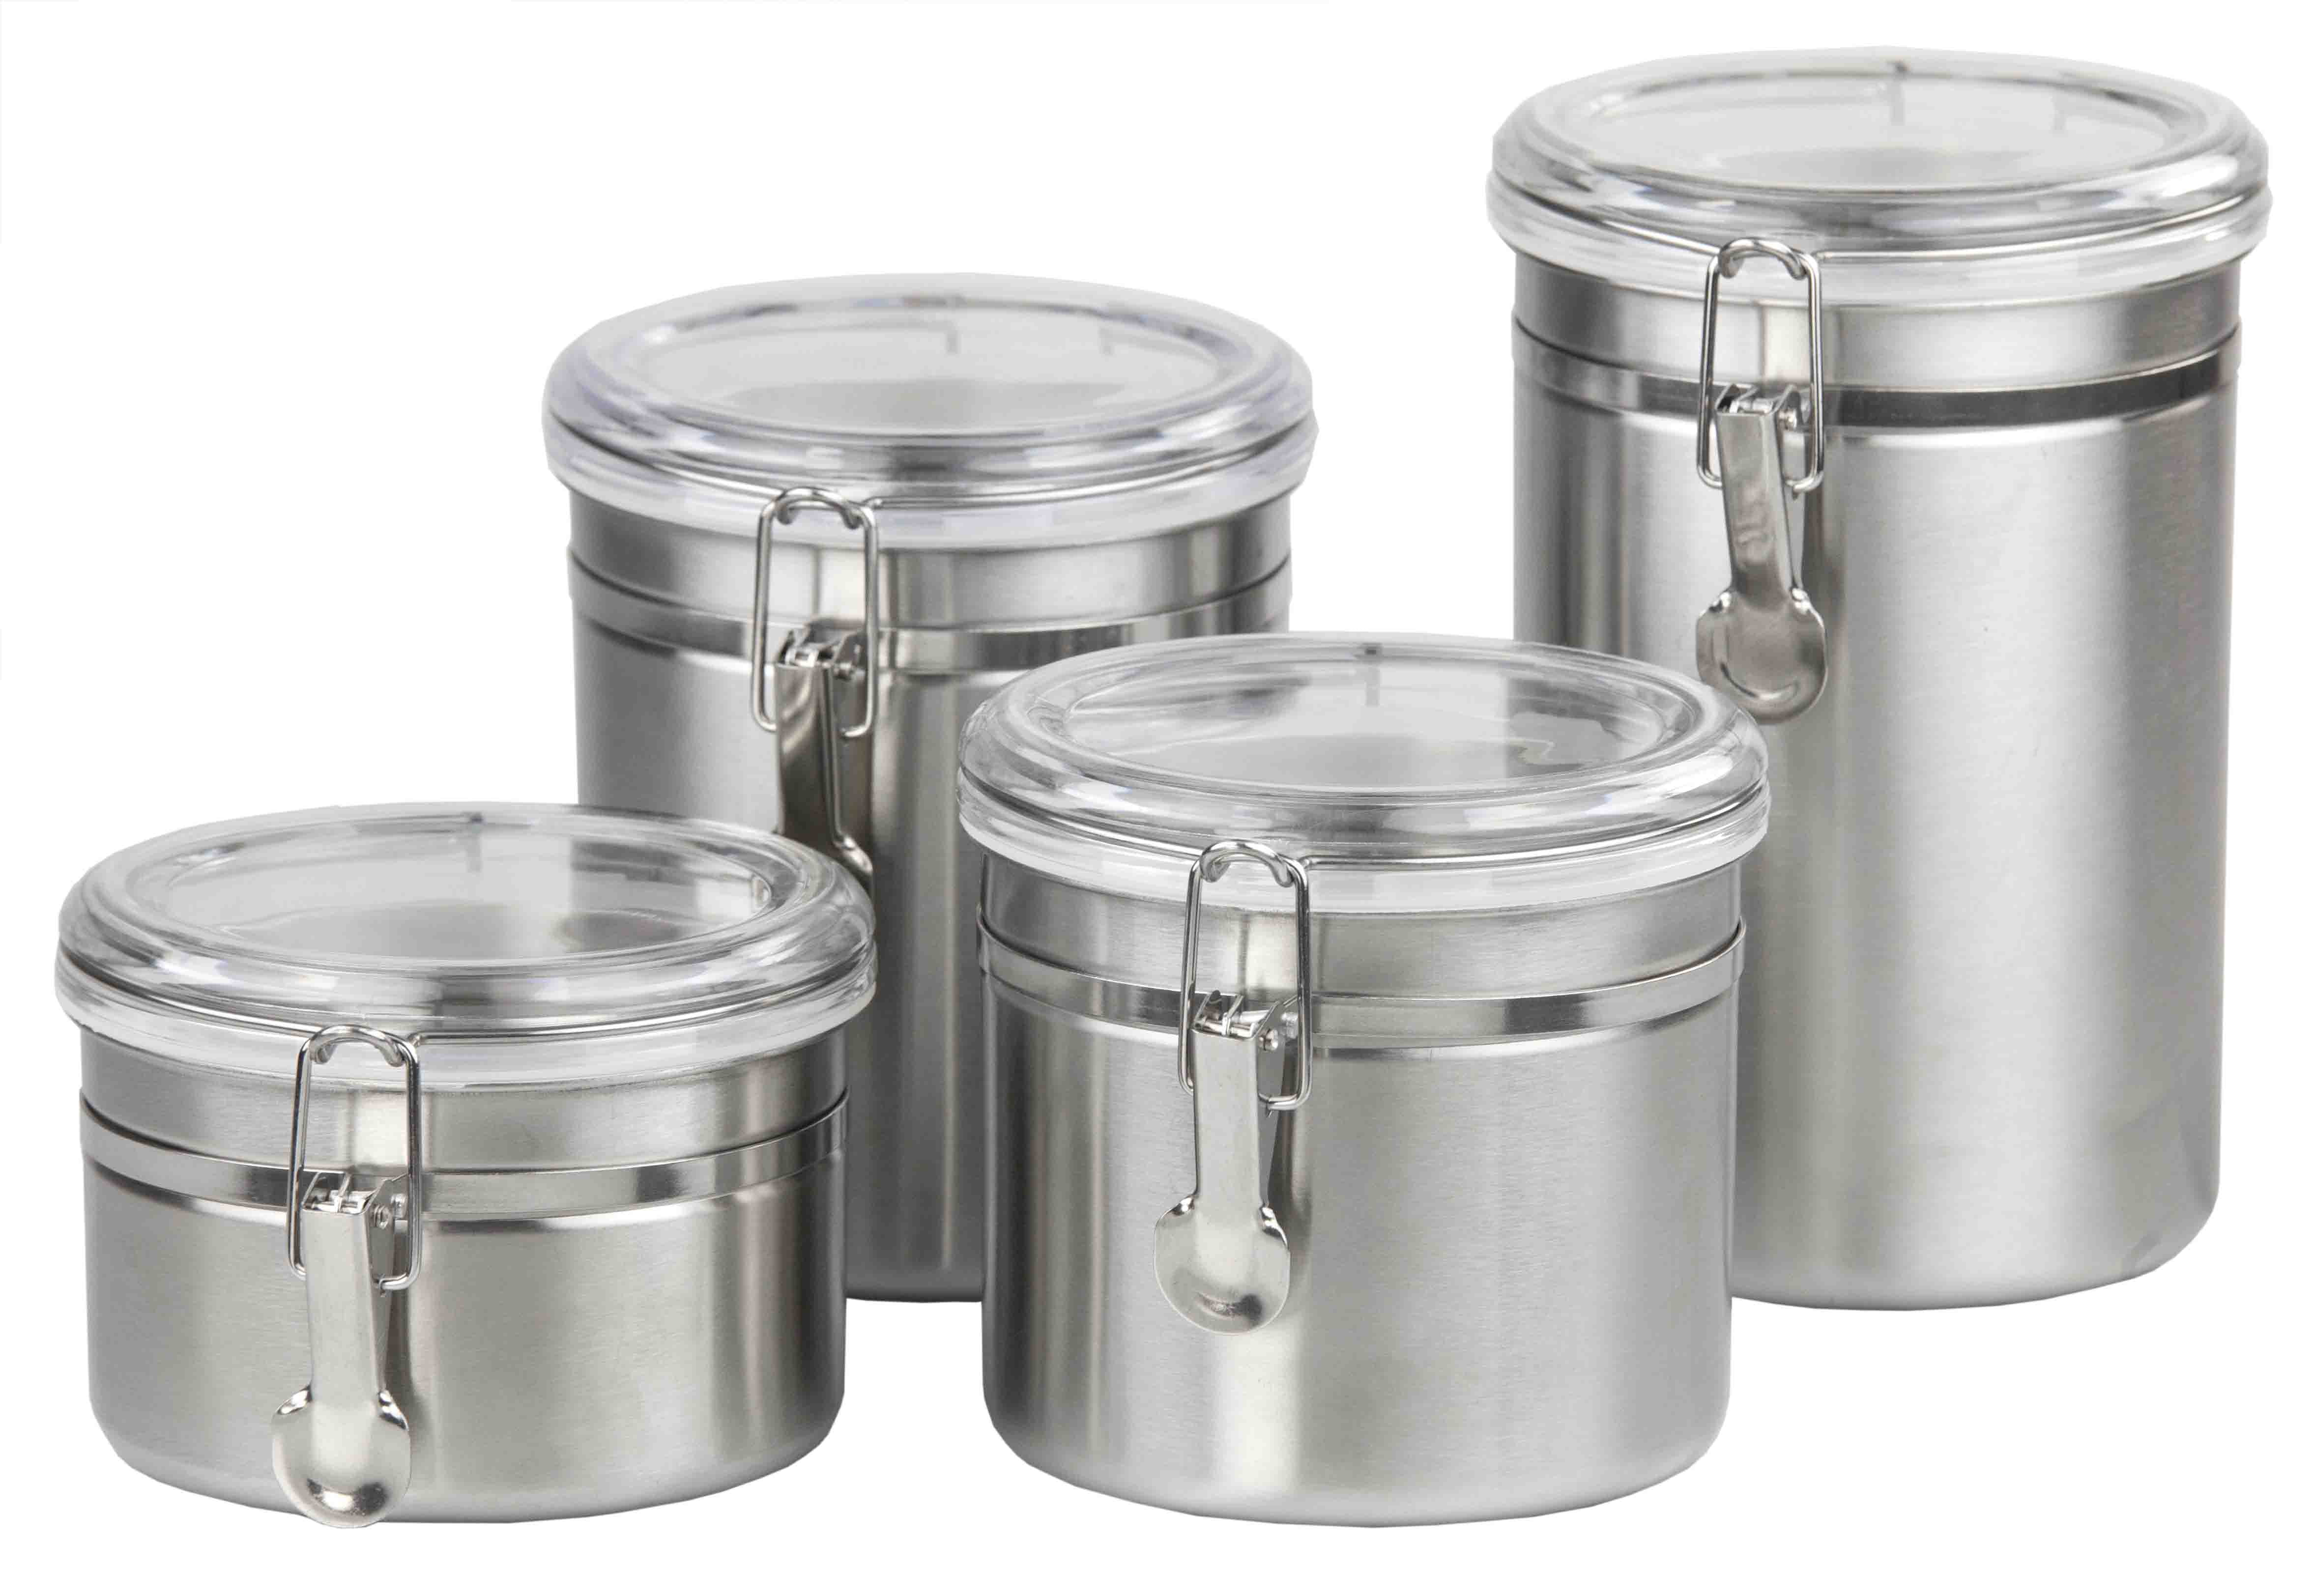 4 Piece Stainless Steel Canister Set - Walmart.com